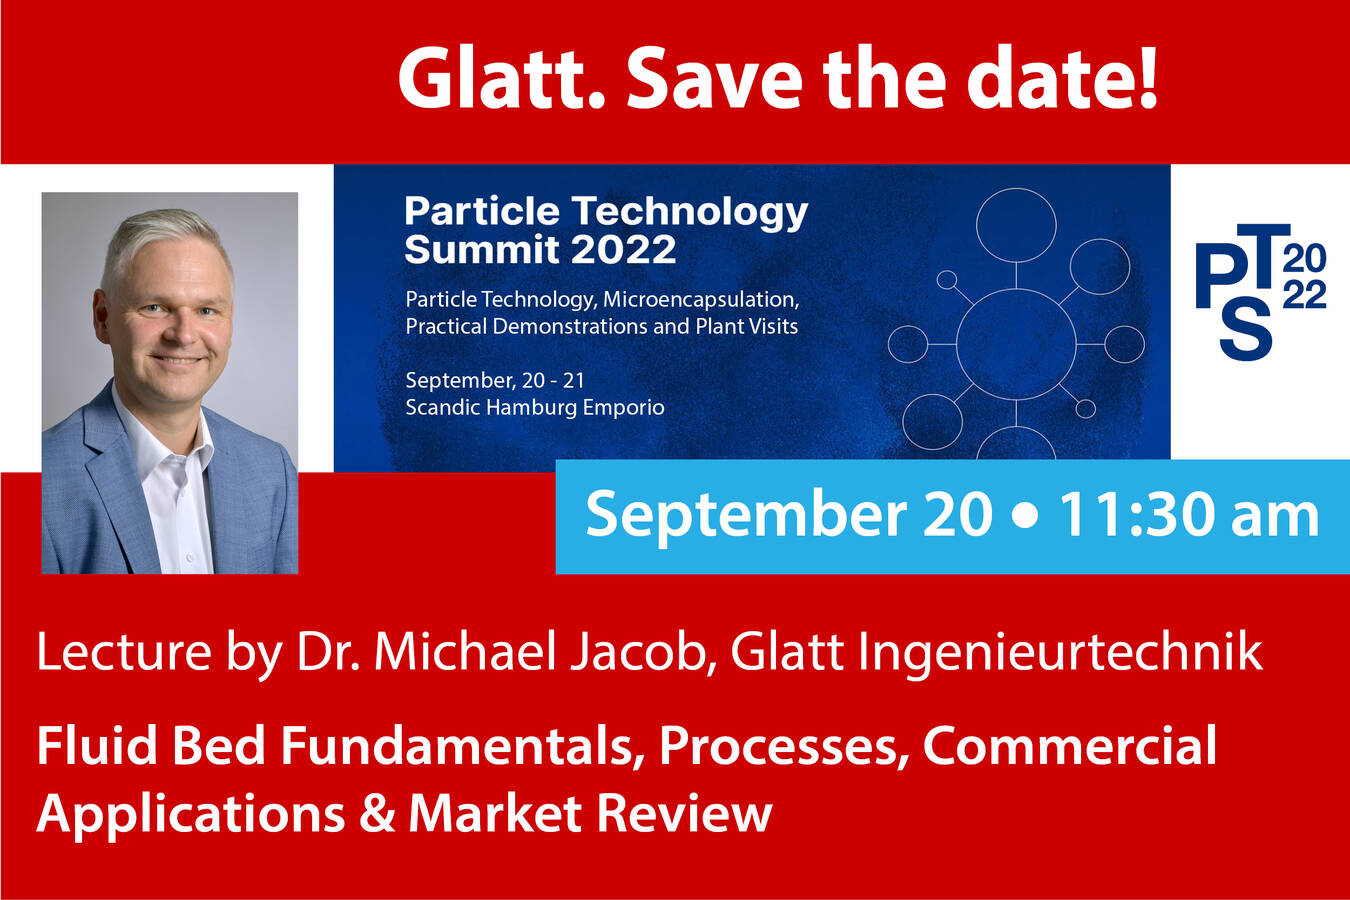 Glatt at the Particle Technology Summit 2022 Lecture on ’Fluid-Bed Fundamentals, Processes, Commercial Applications & Market Review’ by Dr. M. Jacob, Glatt: 20 Sep / 11:30 am